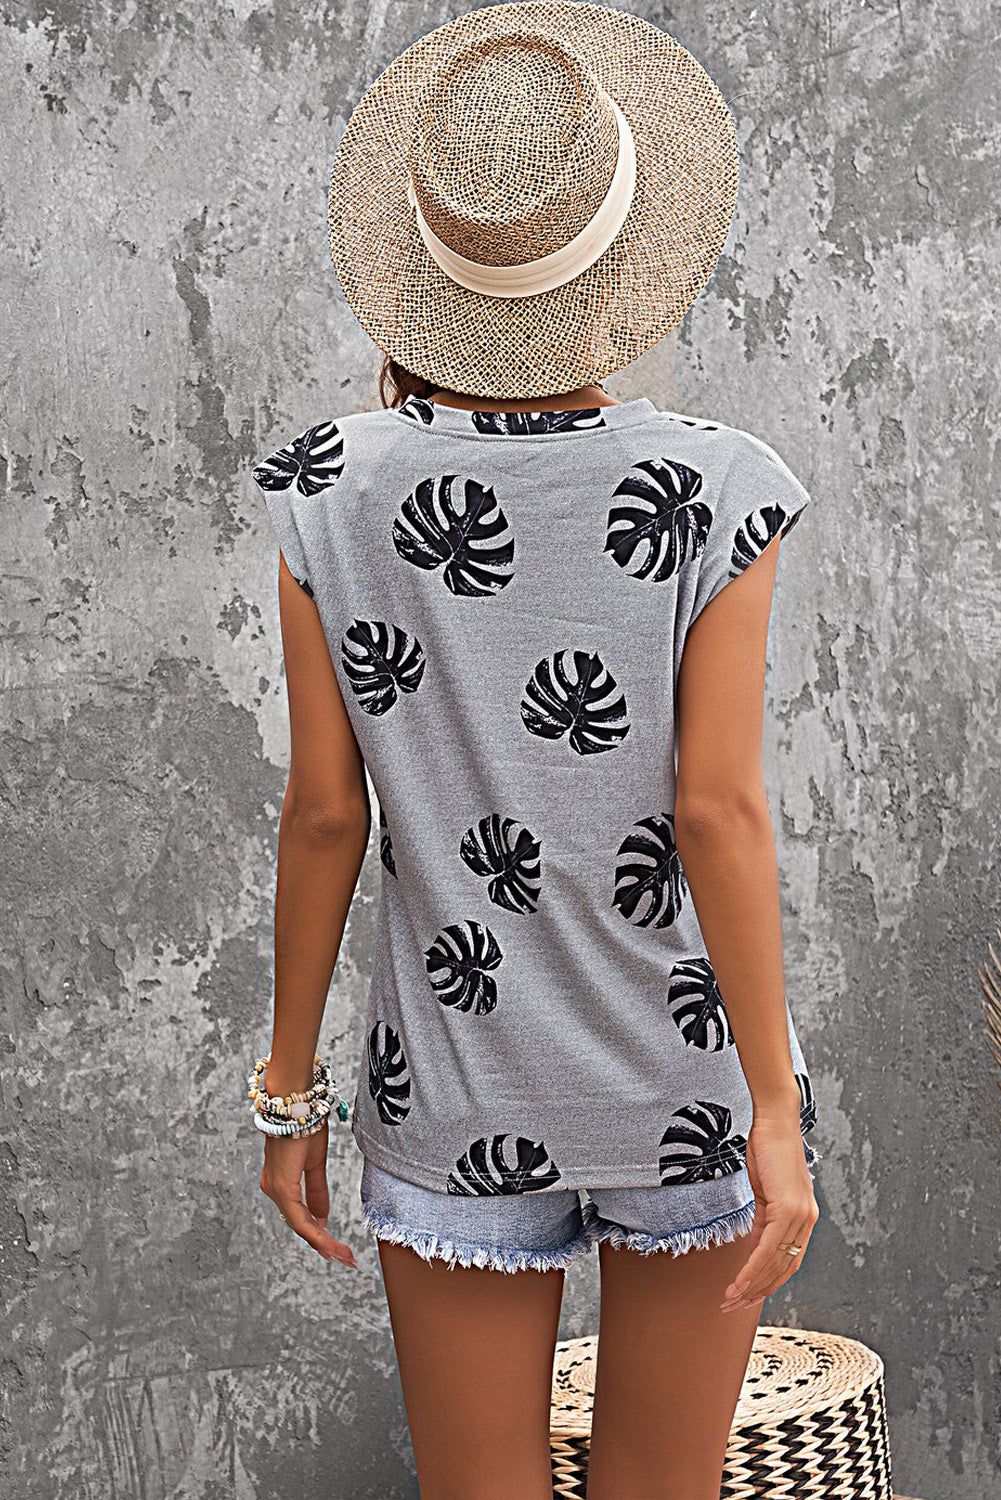 Printed Capped Sleeve Round Neck Top.